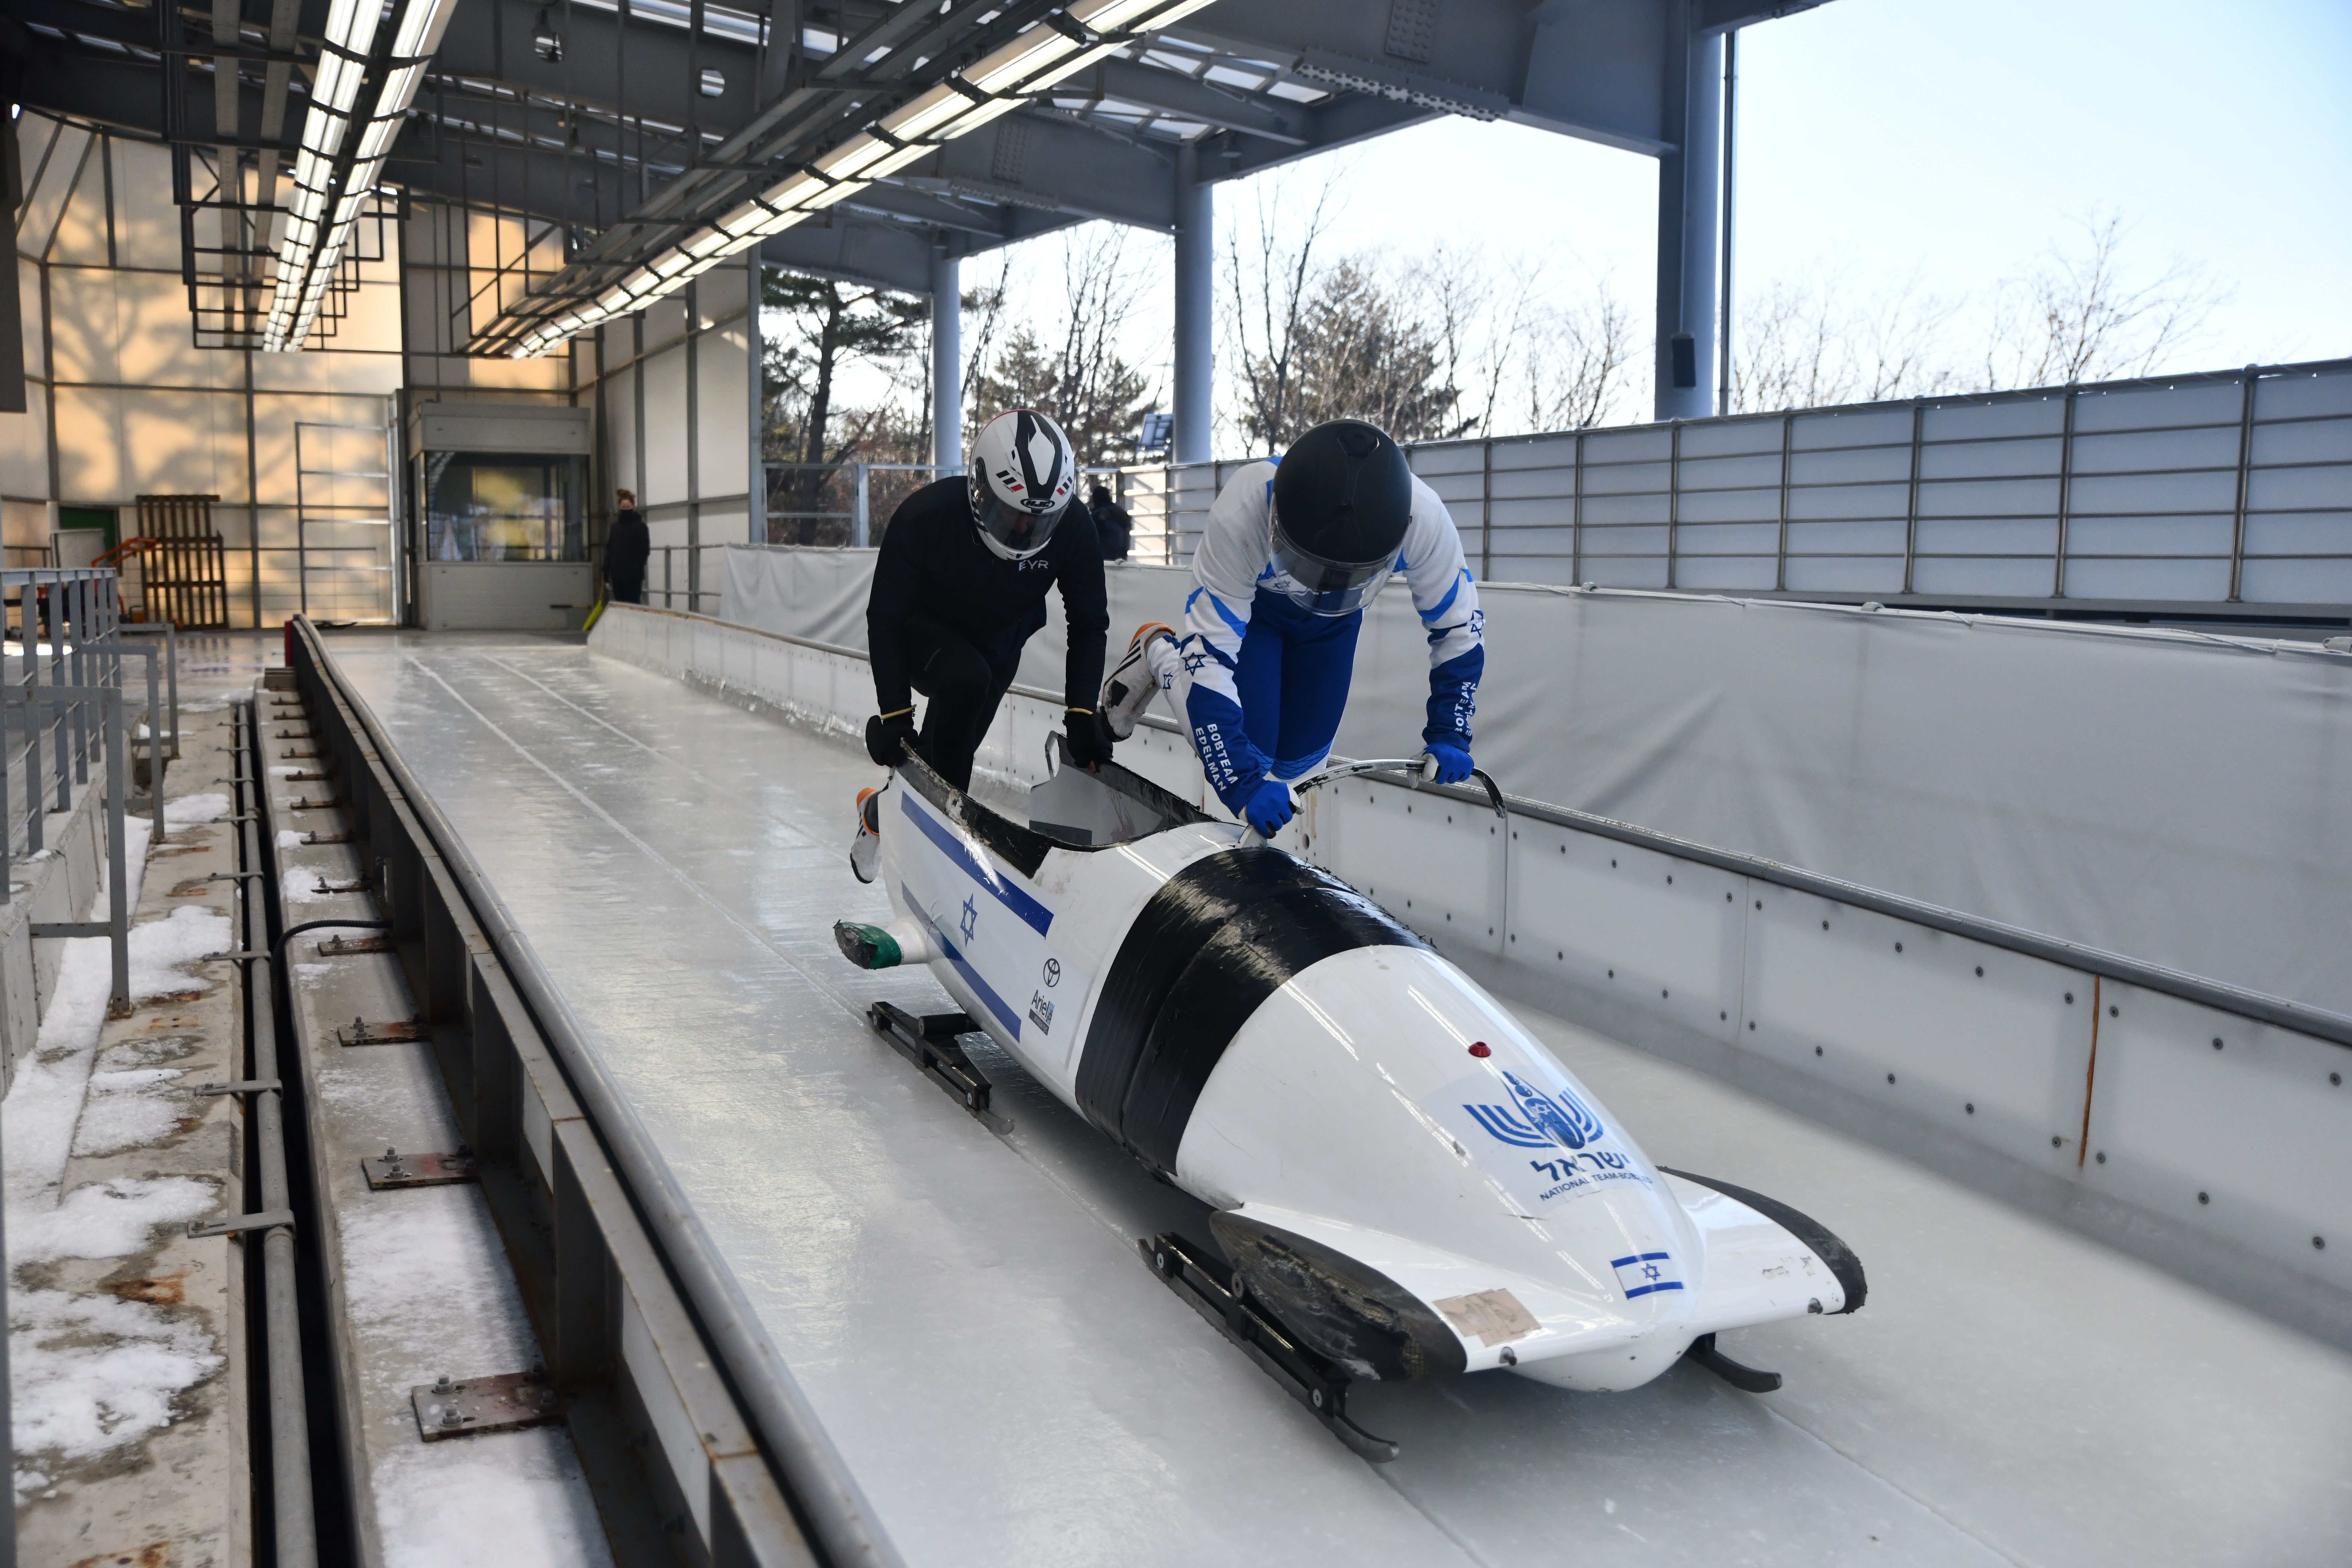 A photo of Edelman and a teammate getting into a bobsled